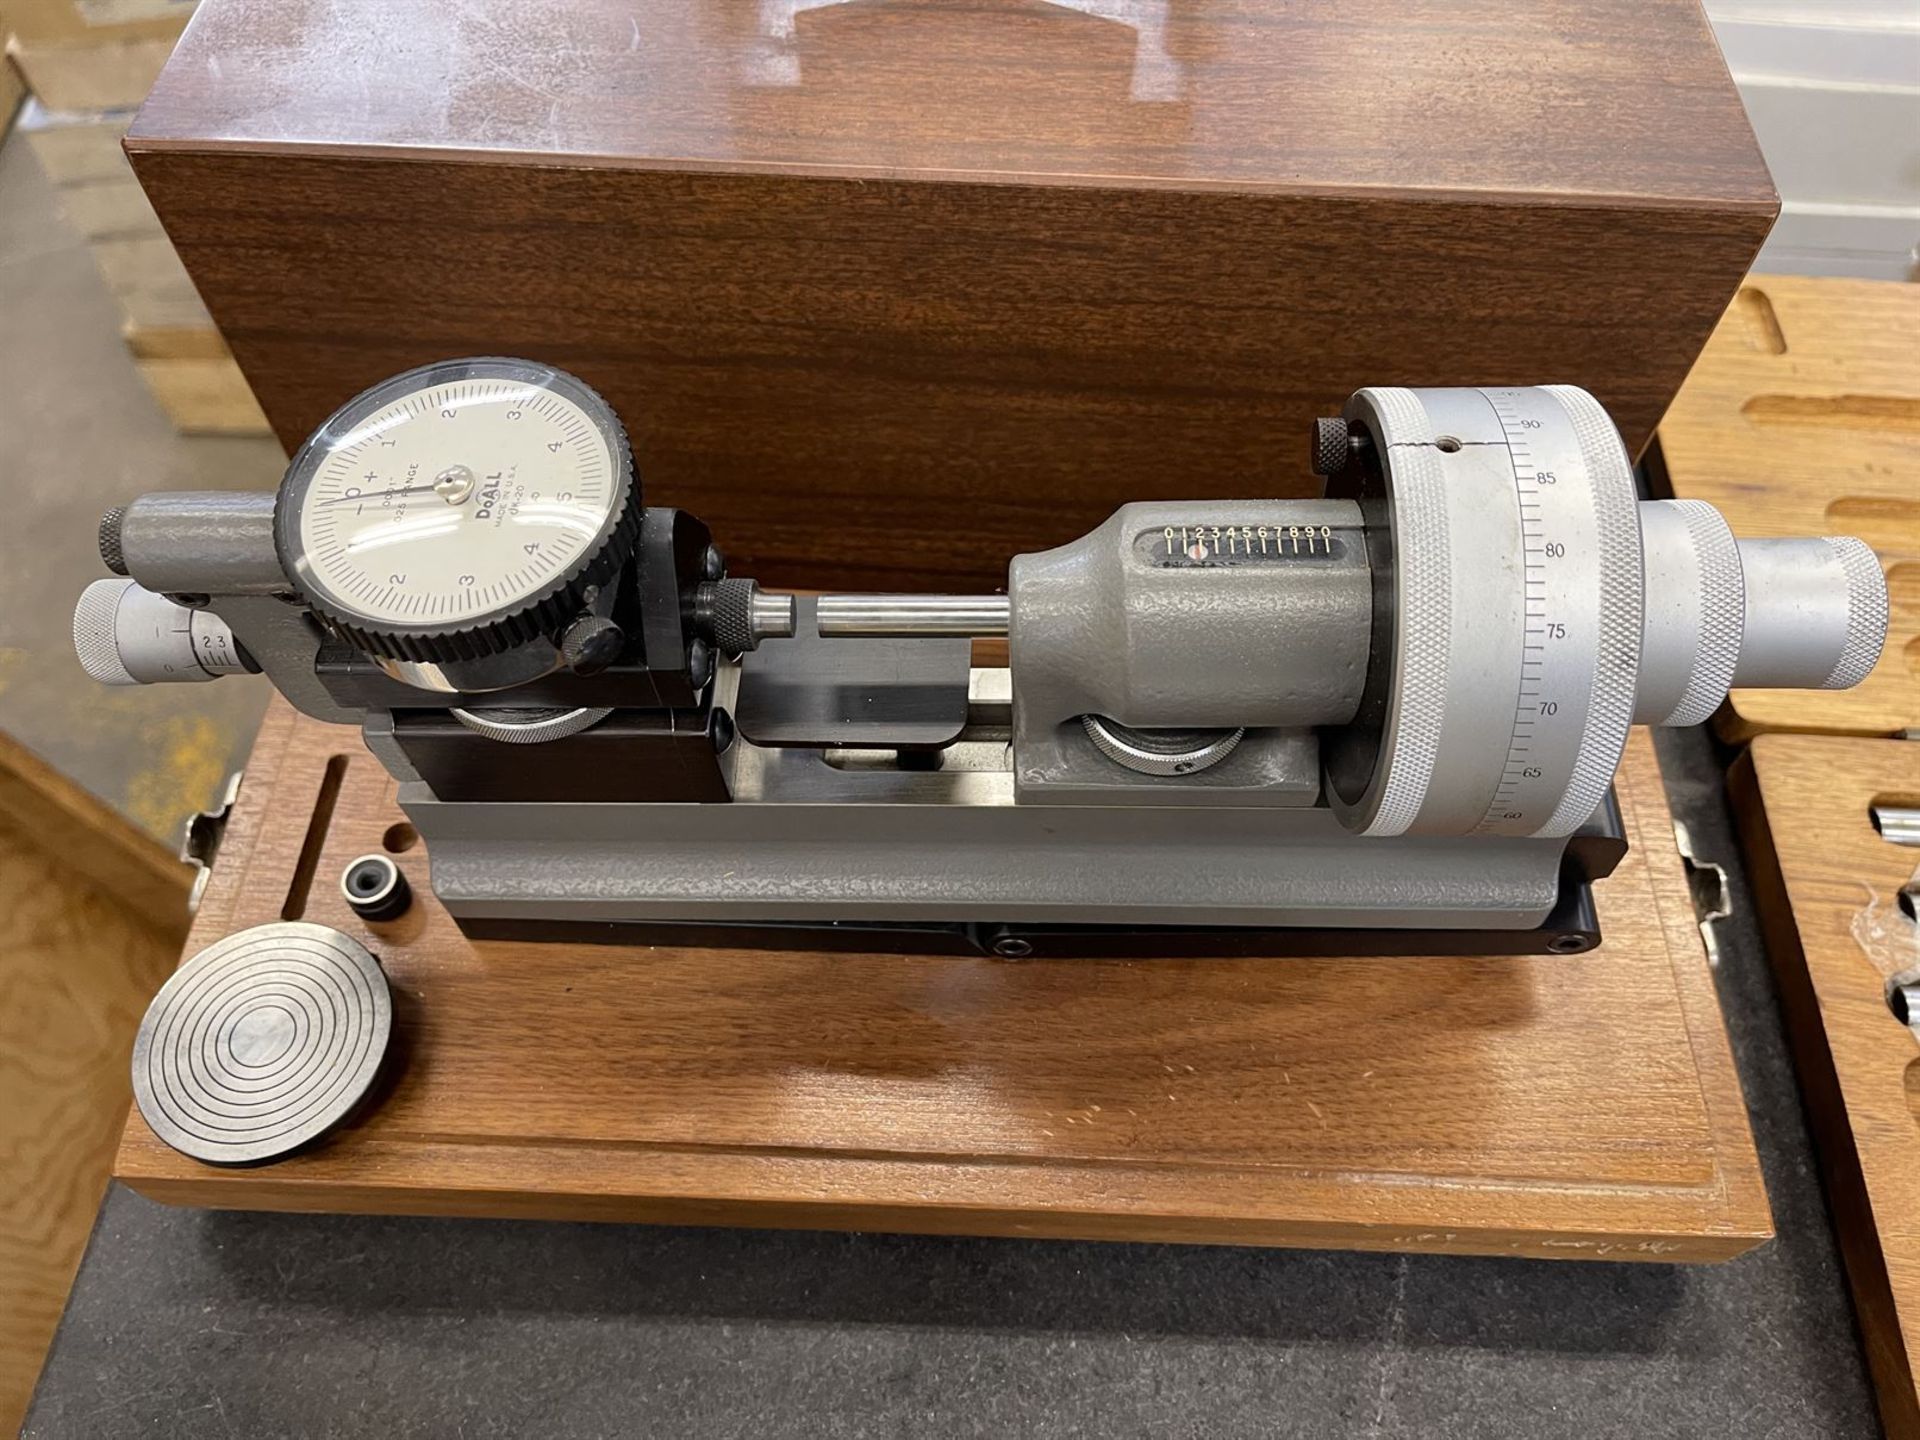 DoAll Micrometer Comparator - Image 2 of 3